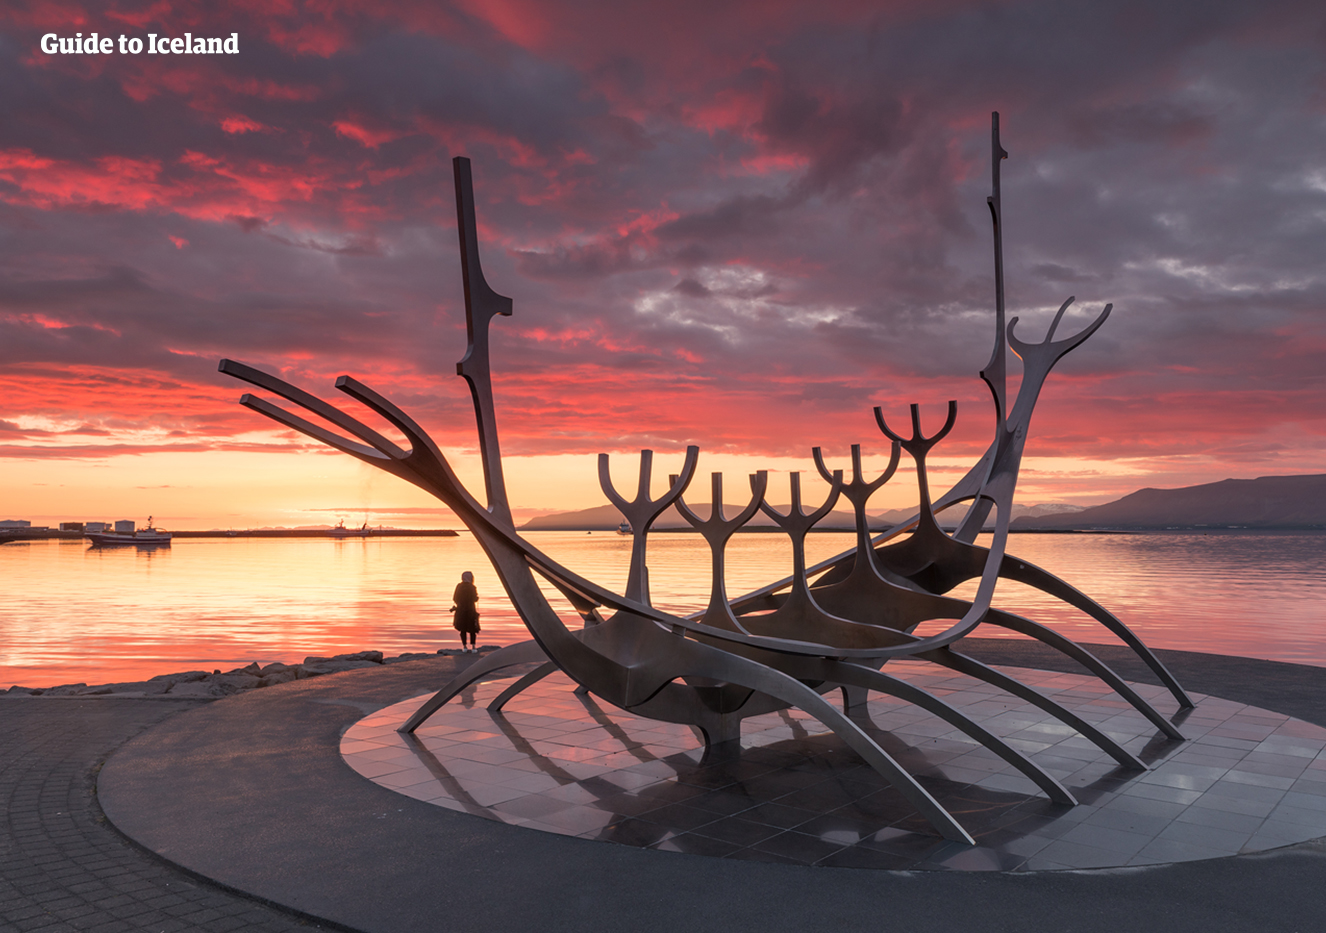 The Sun Voyager, a staple artistic landmark for those visitors to Iceland's charming capital city, Reykjavik.